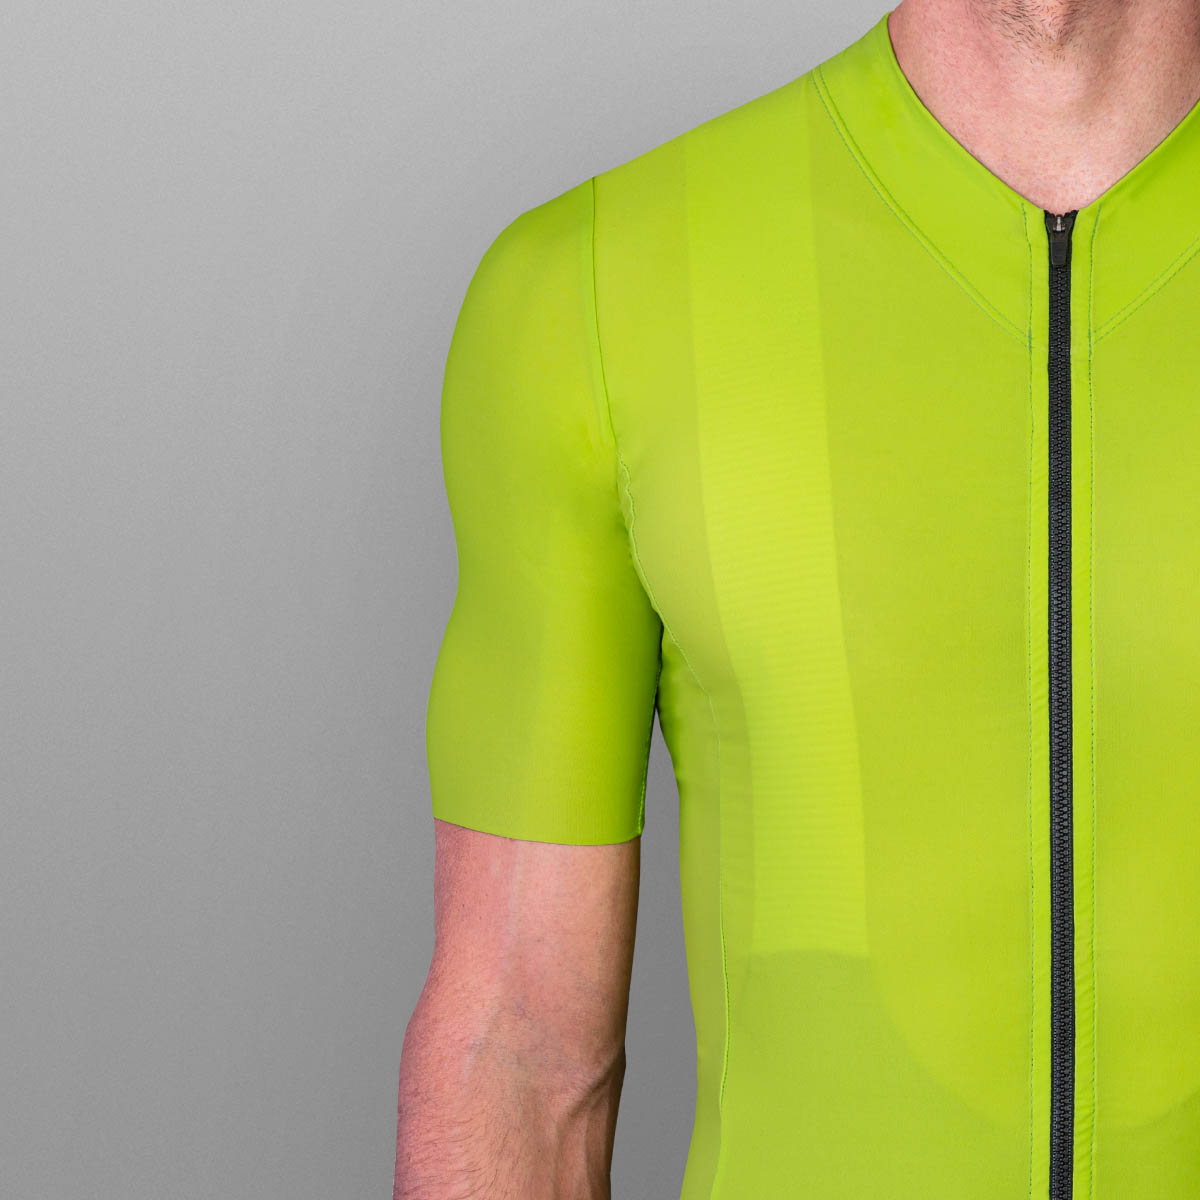 slim race fit cycling jersey in all clean lime style